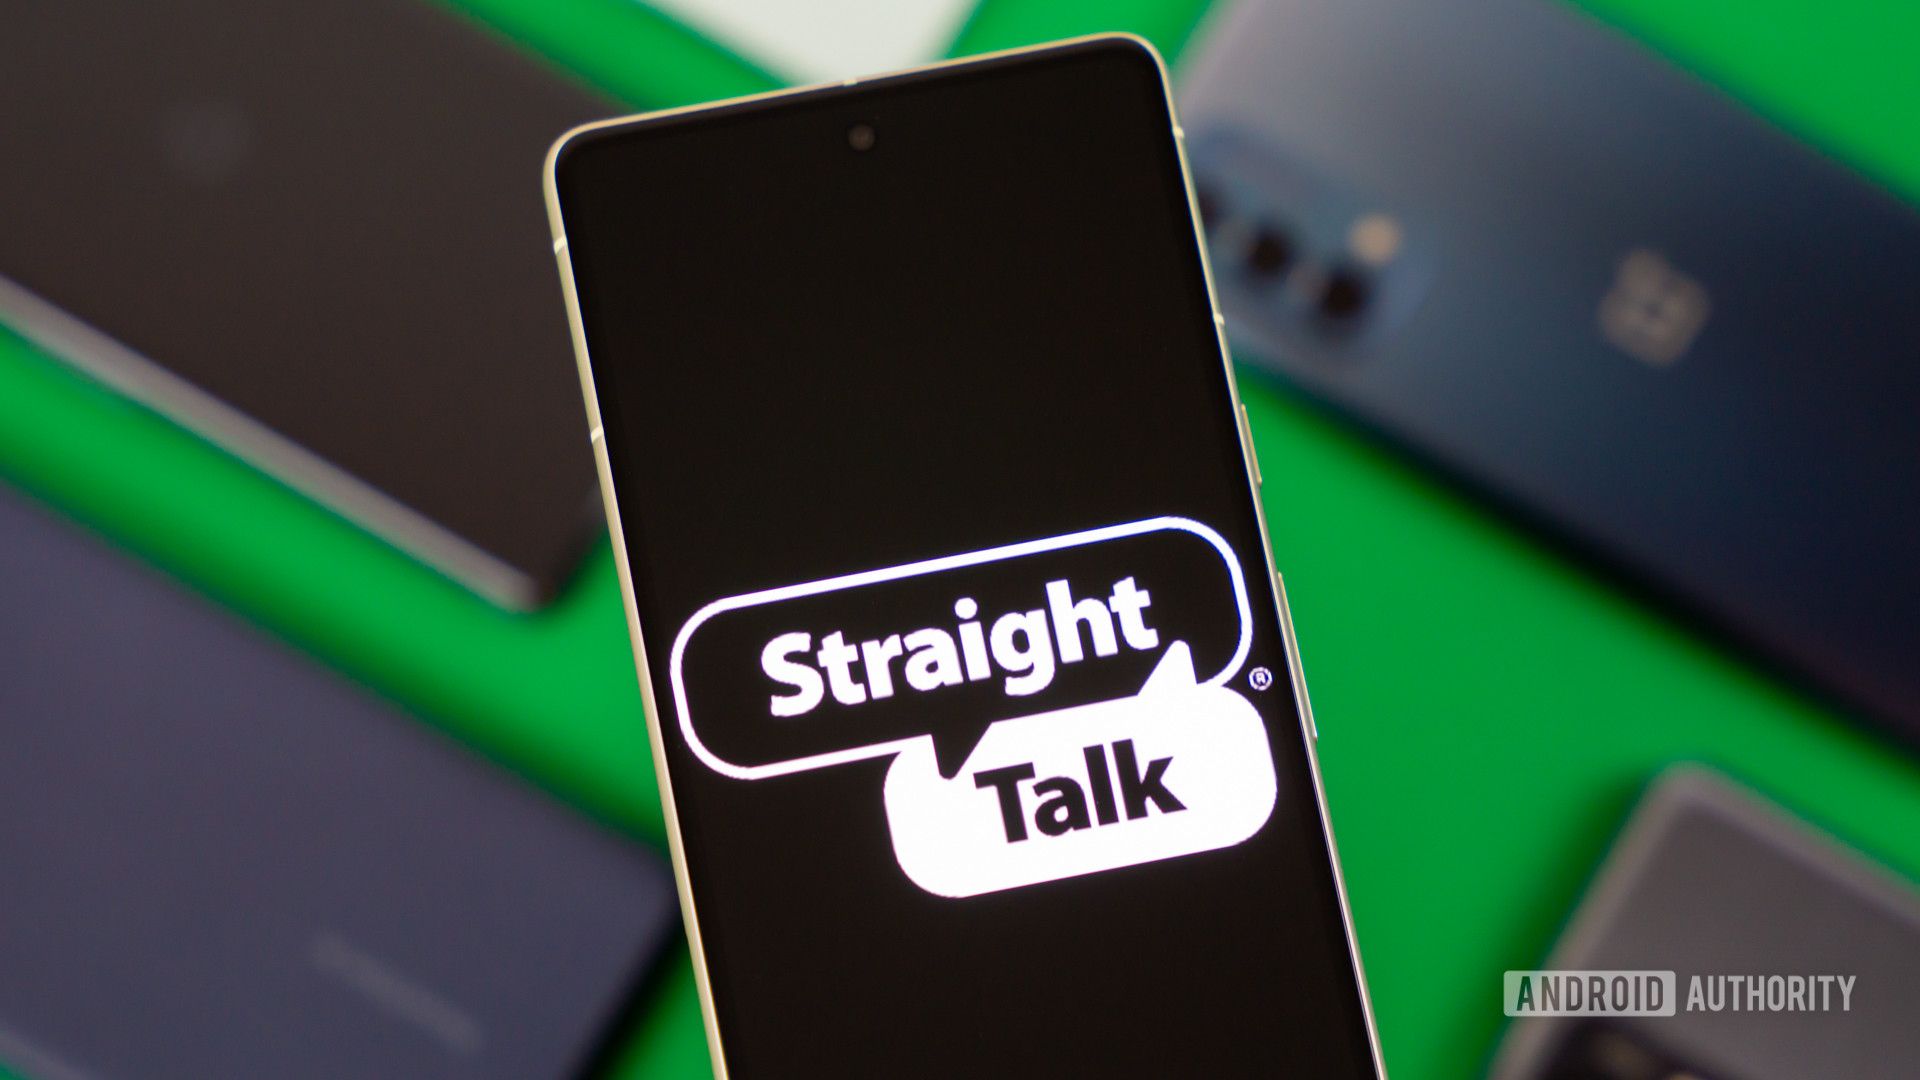 Stock photo of Straight Talk logo on phone with many devices 2